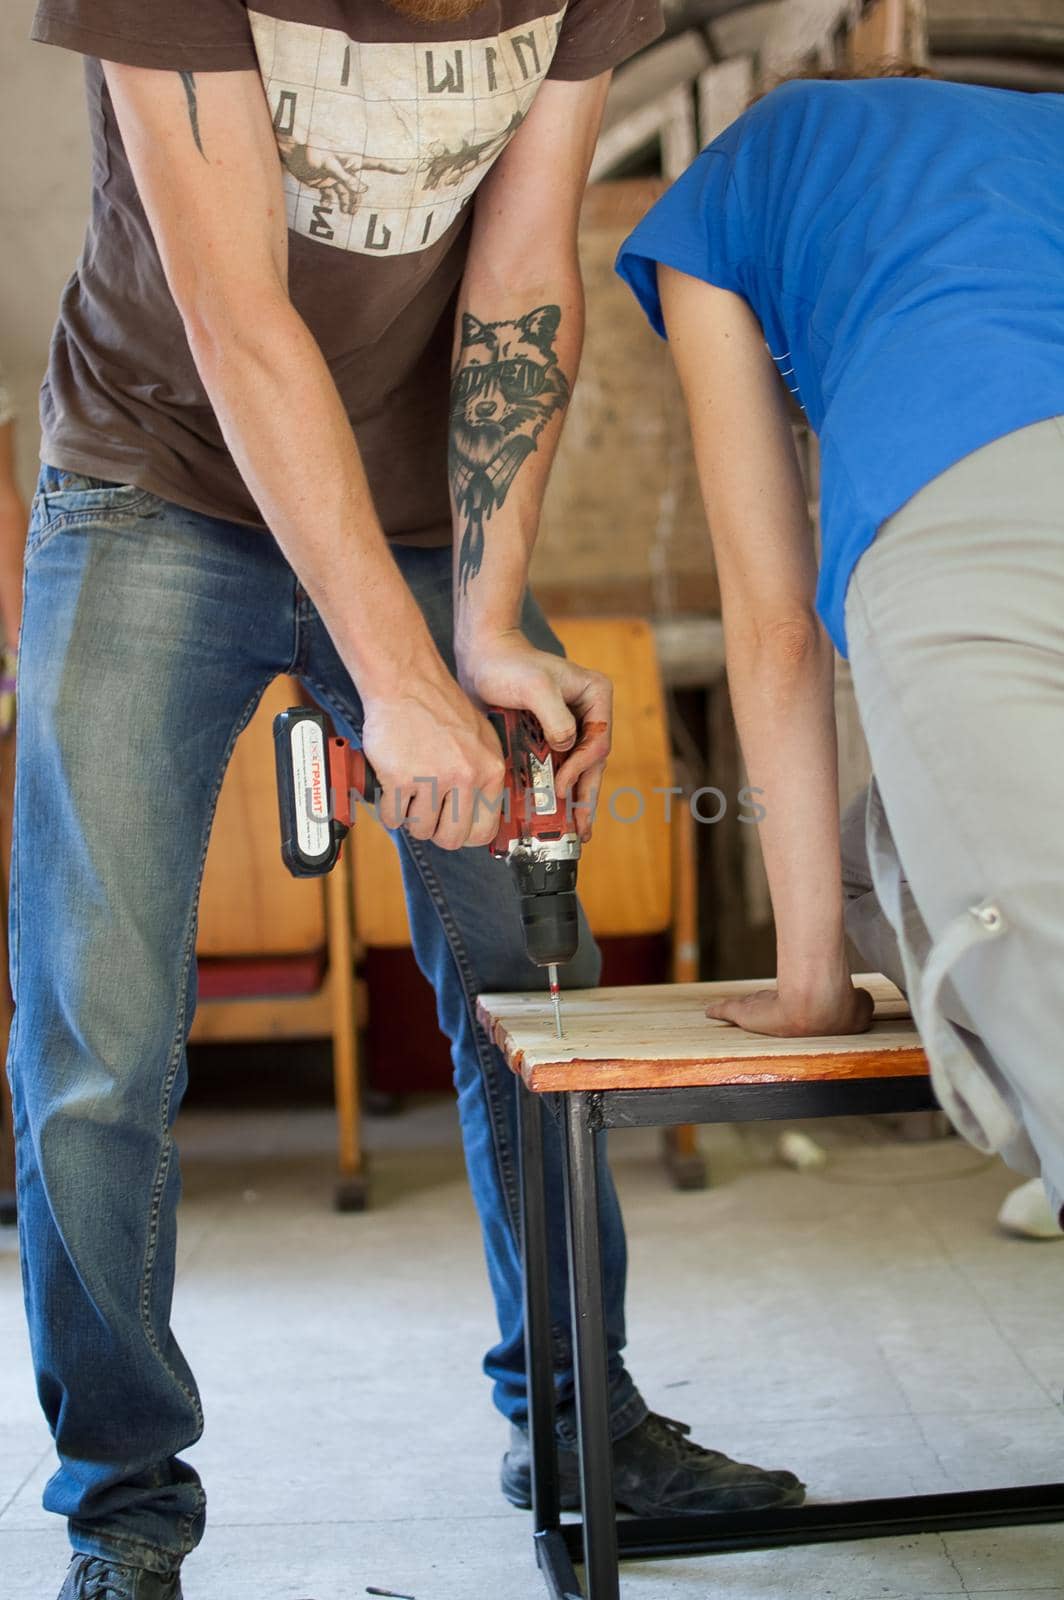 13.08.2021 - Ukraine, Goshcha, group of young workers is using power screwdriver drilling, hambler during construction wooden bench, do it together by balinska_lv